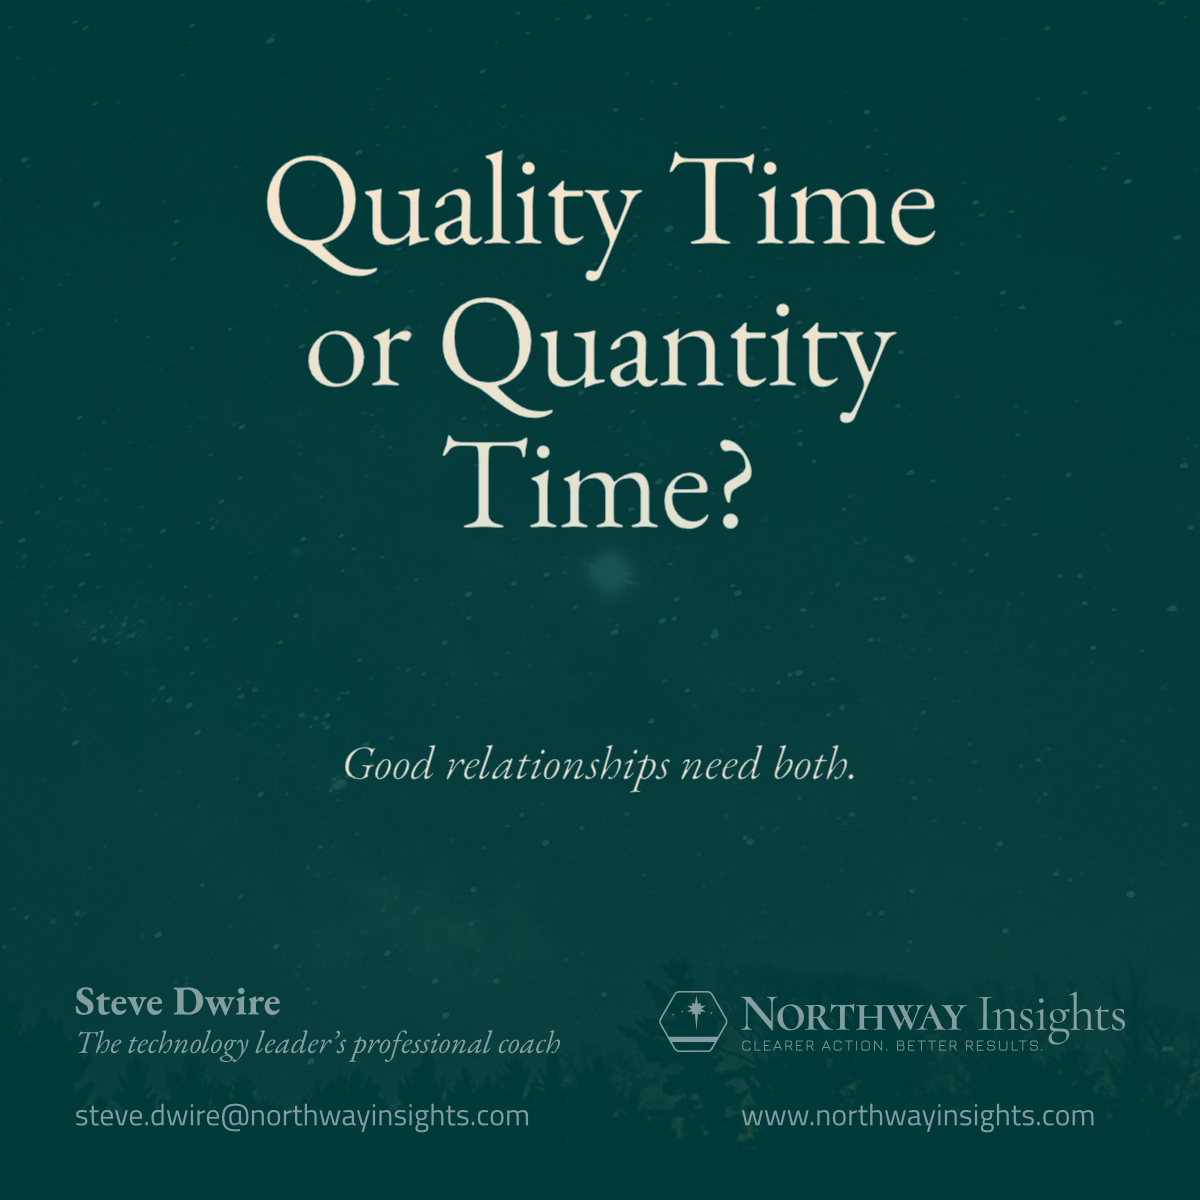 Quality Time or Quantity Time? (Good relationships need both.)